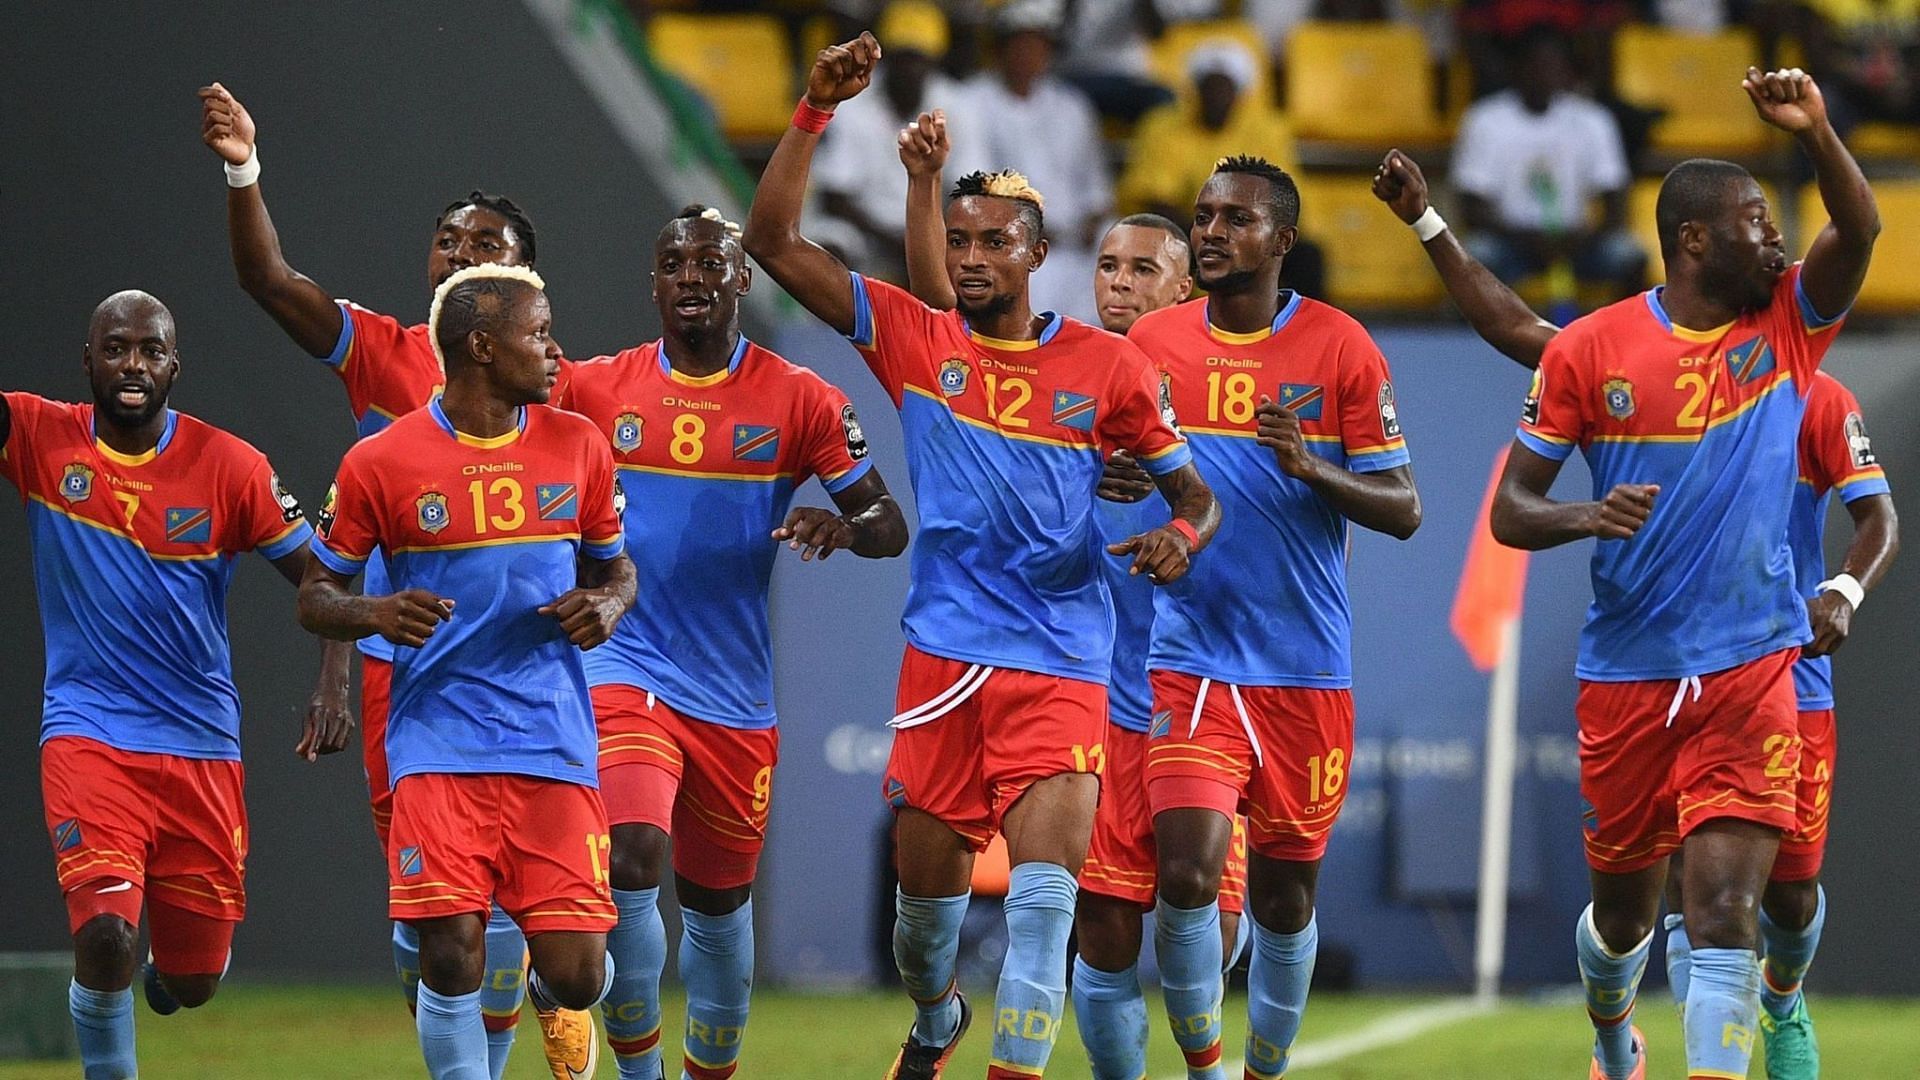 Congo DR face Bahrain in an international friendly game on Tuesday